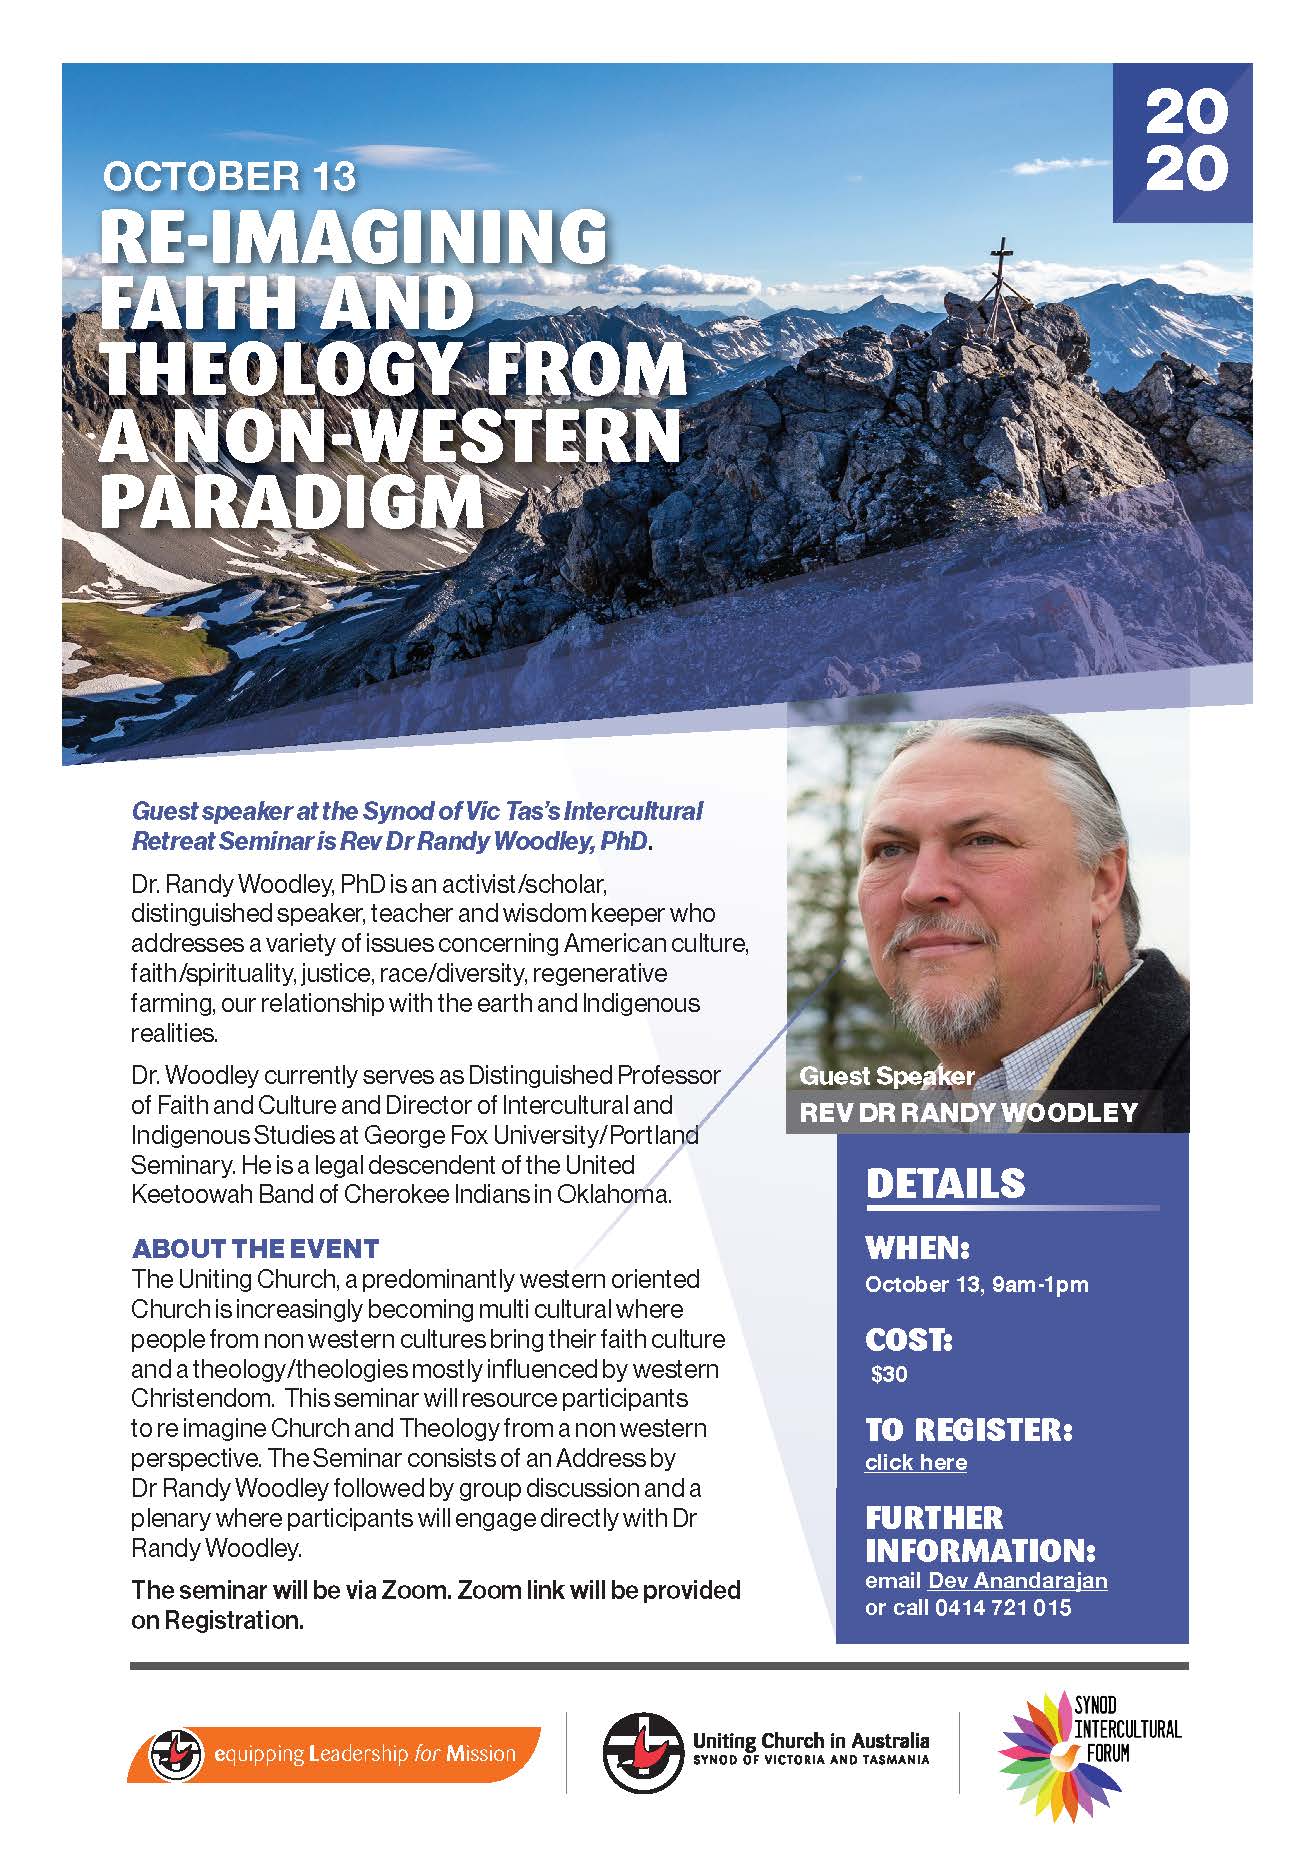 Re imagining faith and theology from a non western paradigm flyer